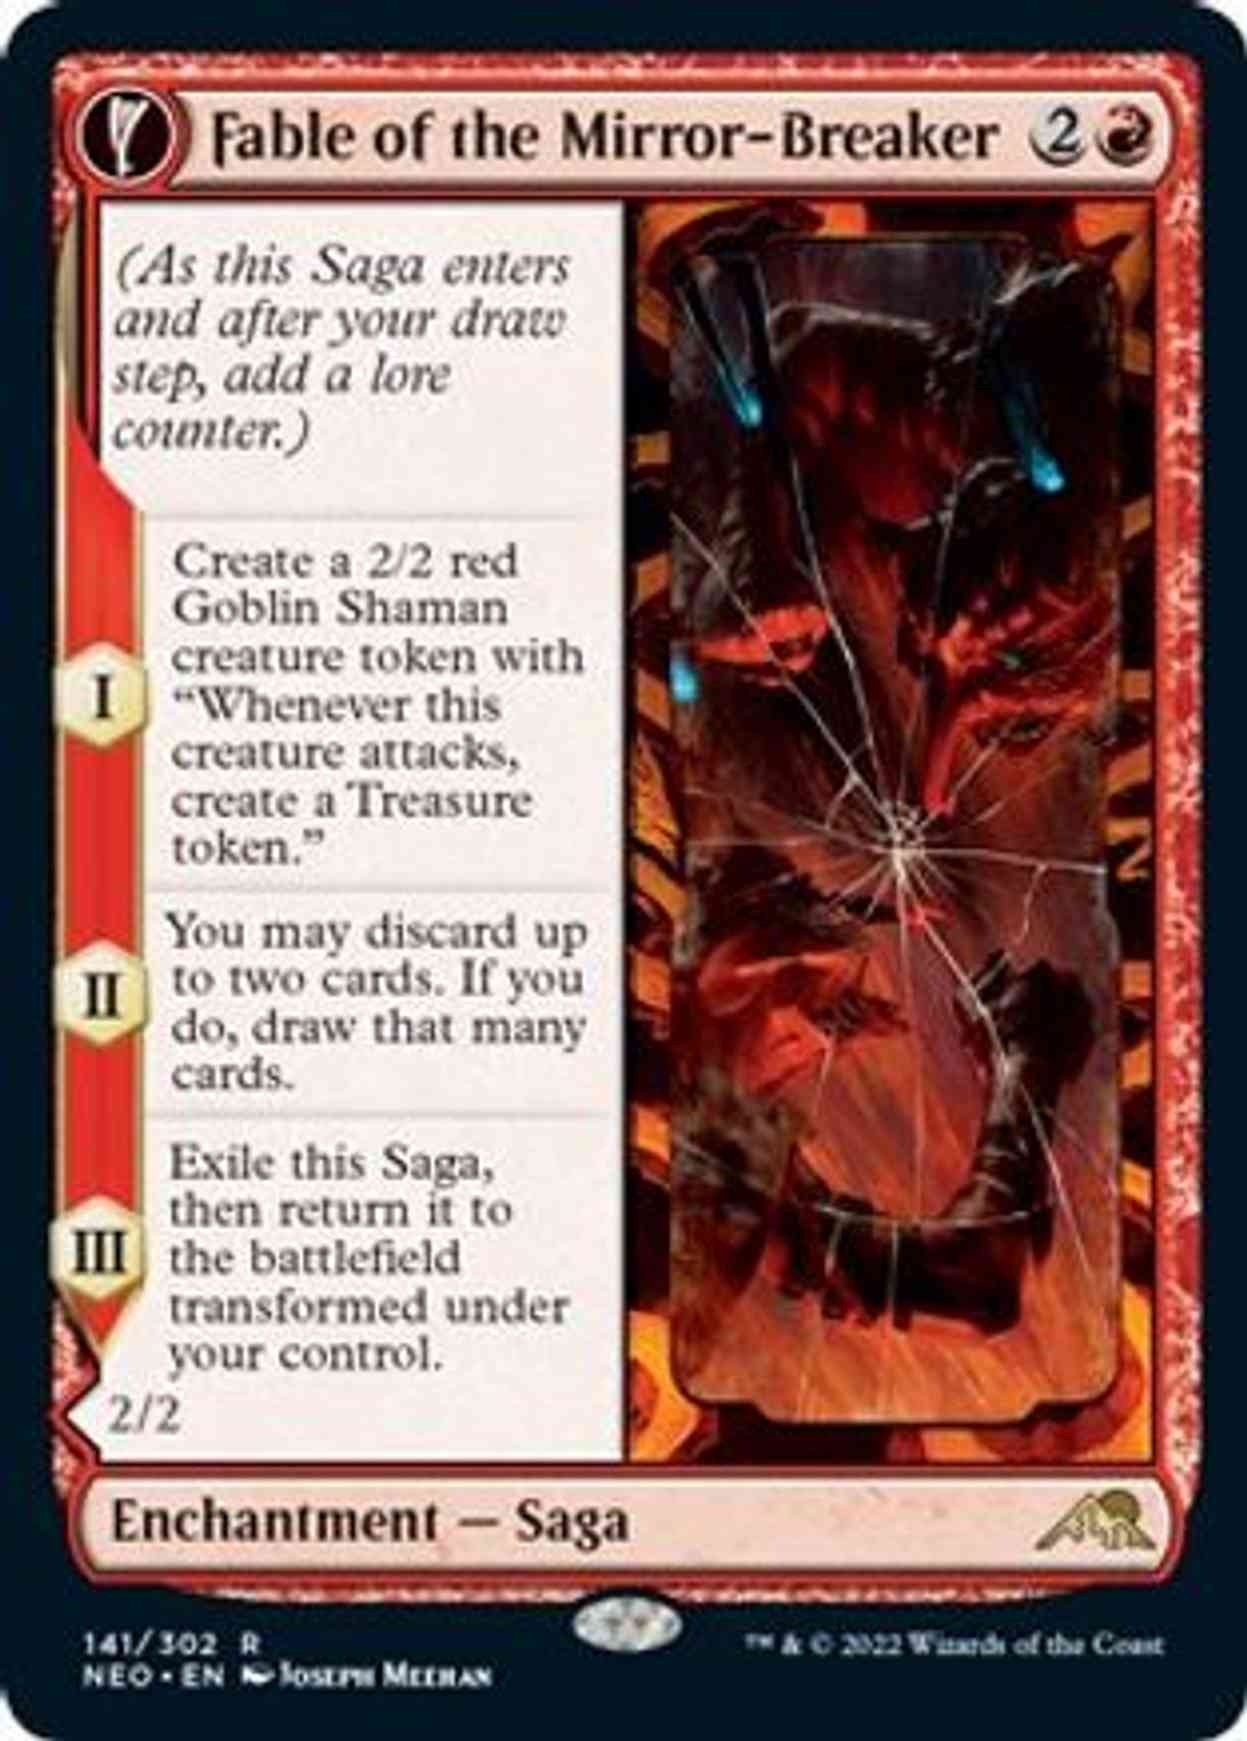 Fable of the Mirror-Breaker magic card front